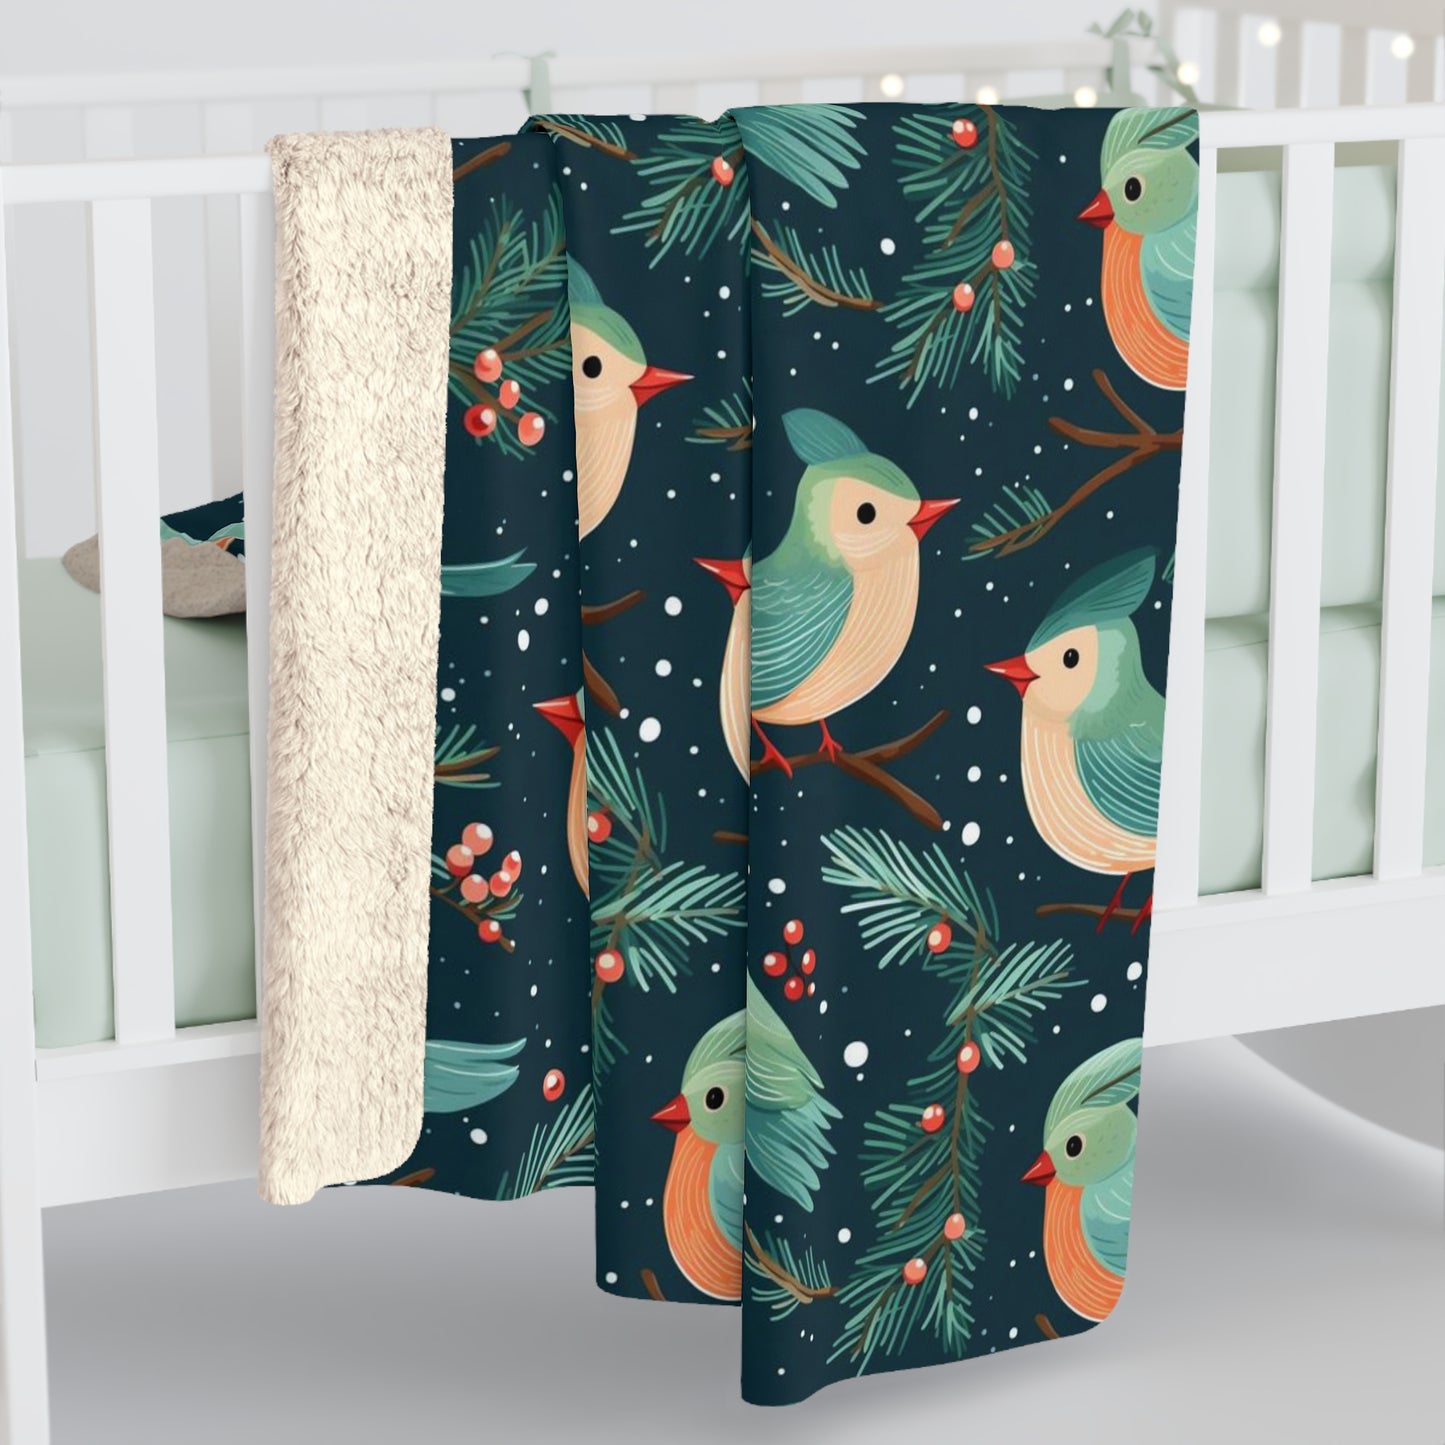 Christmas Birds Sherpa Fleece Blanket, Green Xmas Berries Throw Soft Fluffy Cozy Warm Adult Kids Large Home Decor Gift Bed